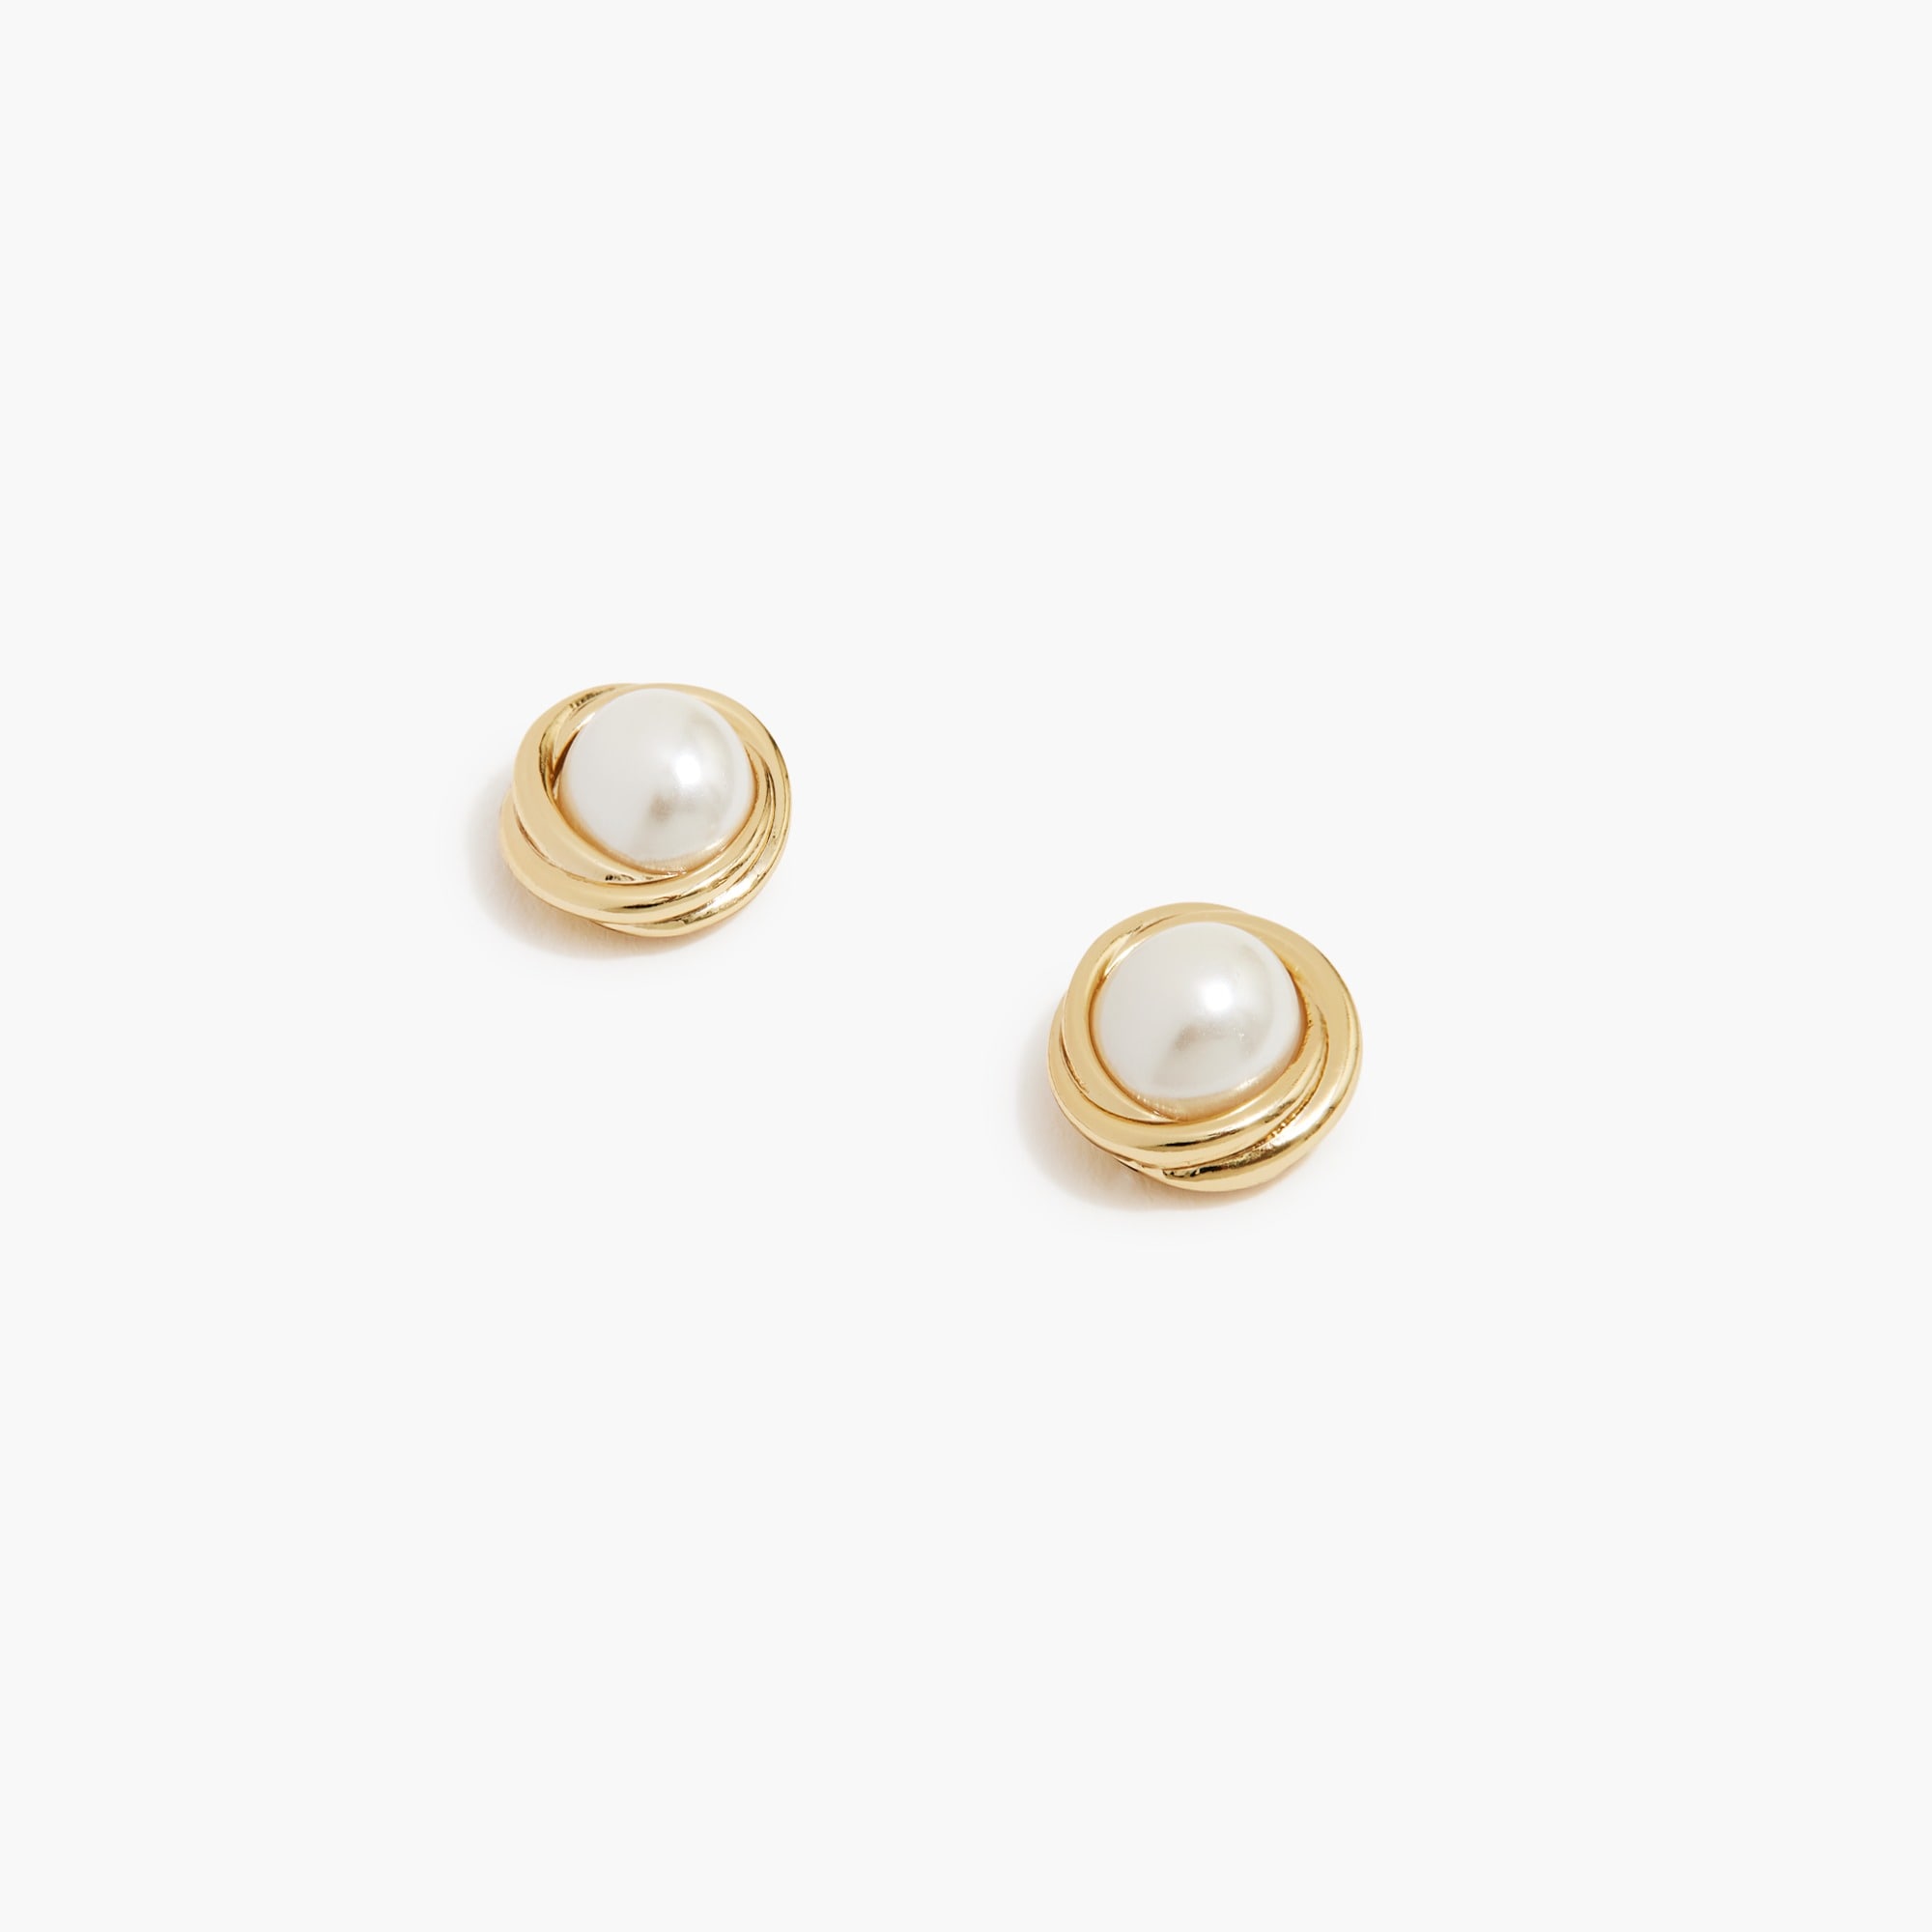 Pearl and gold stud earrings